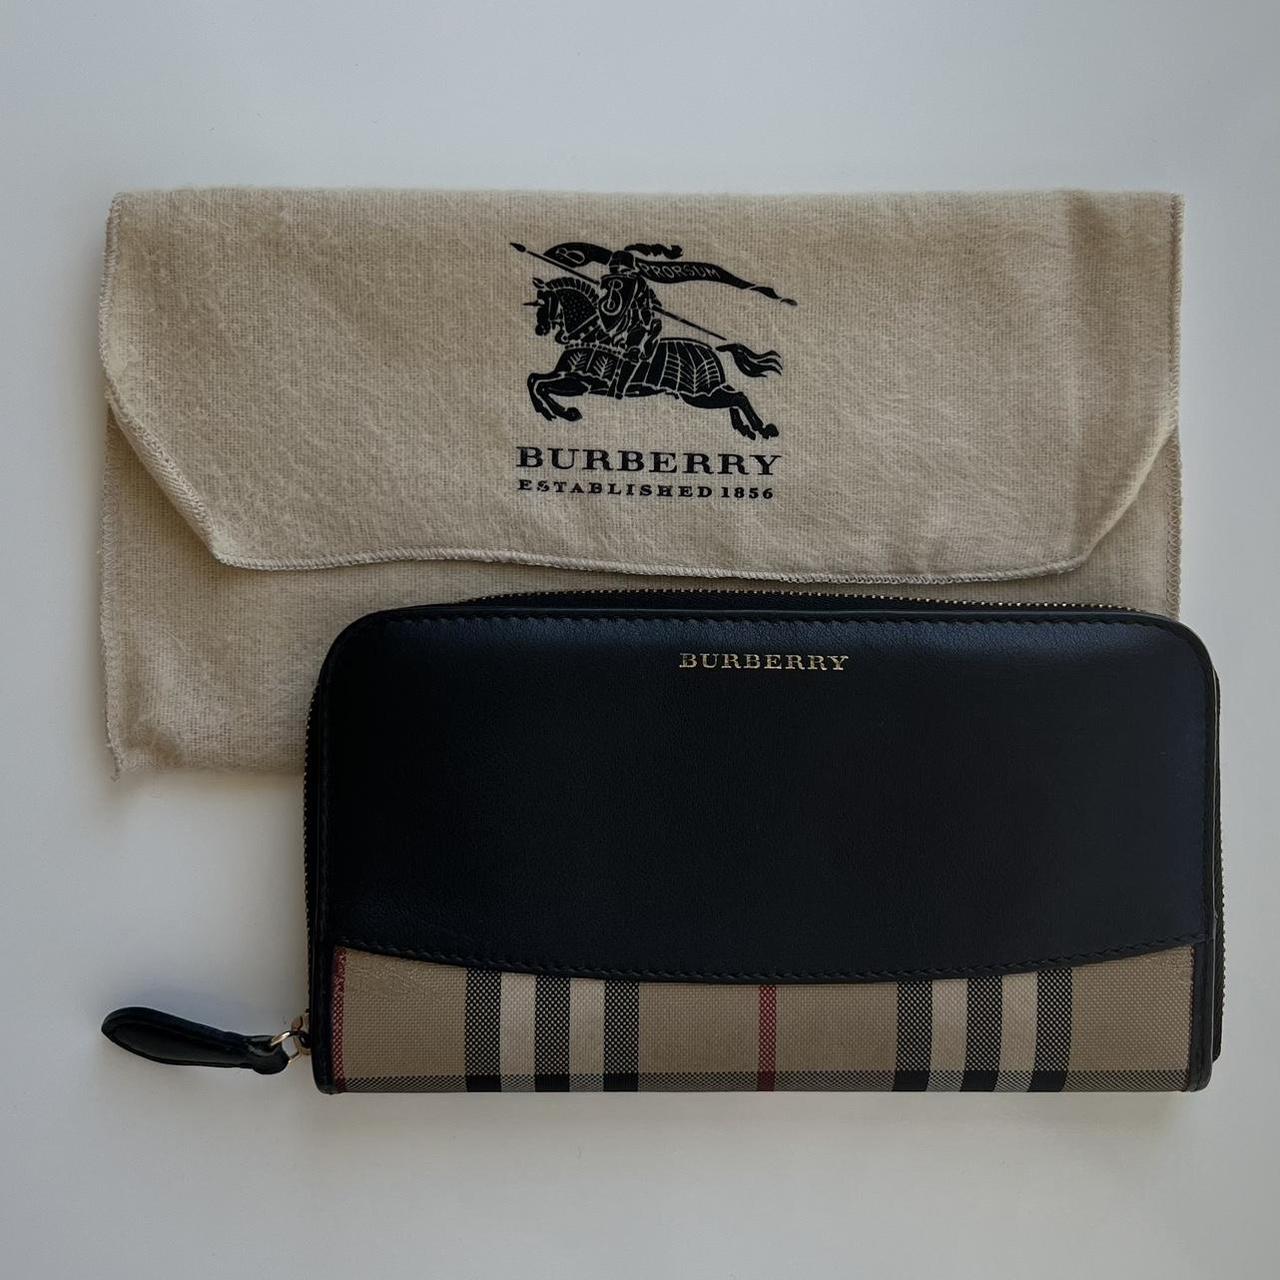 Burberry, Bags, Authentic Burberry Wallet